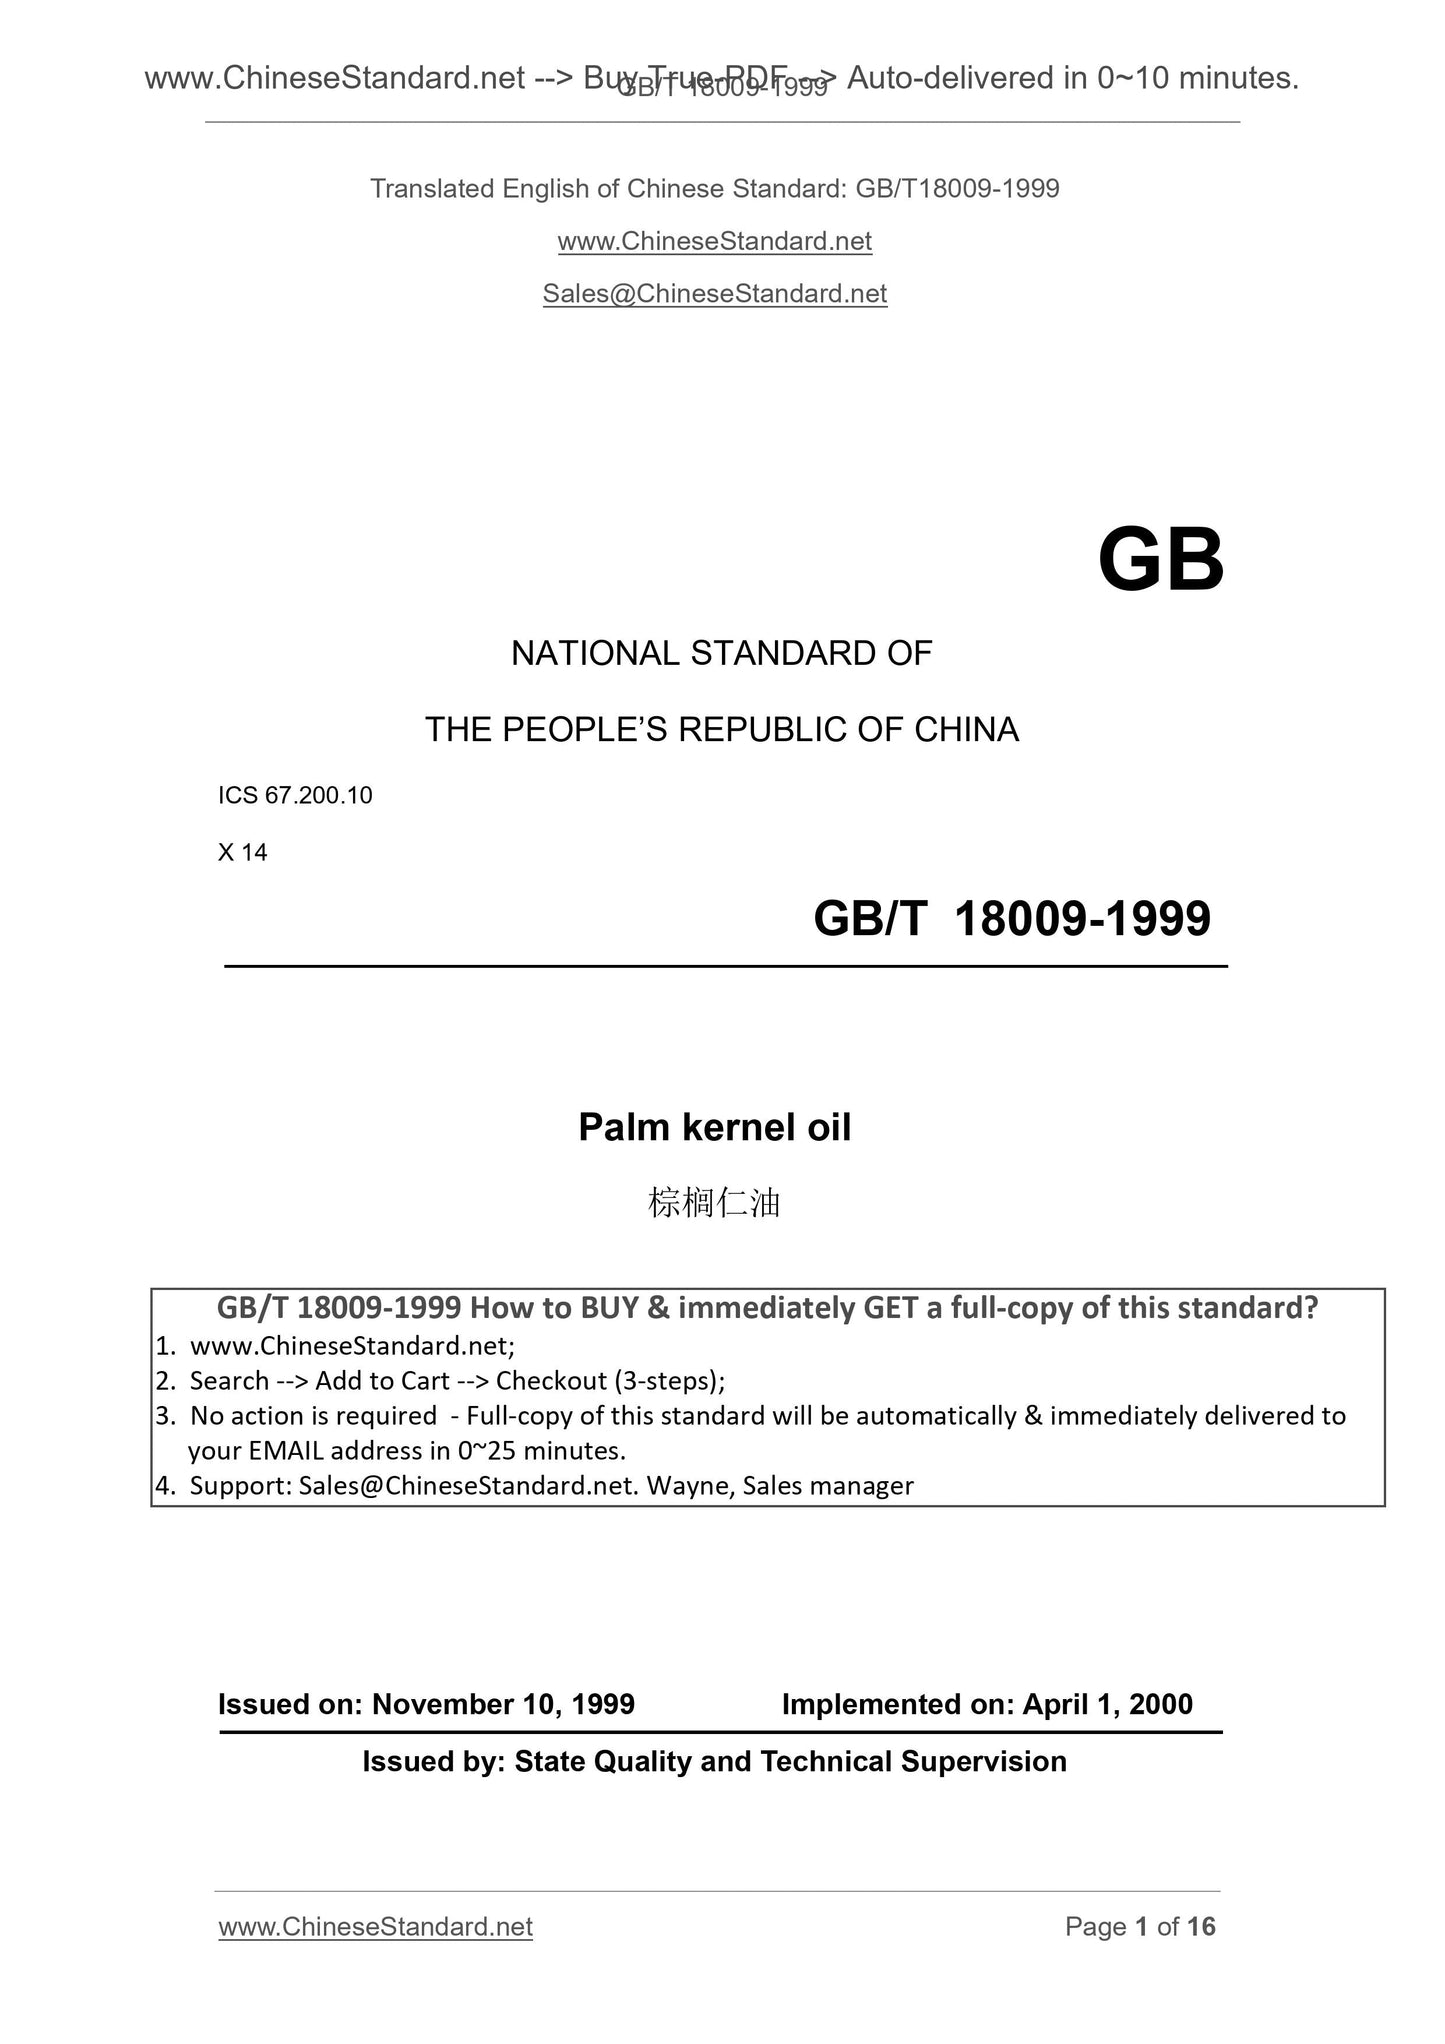 GB/T 18009-1999 Page 1